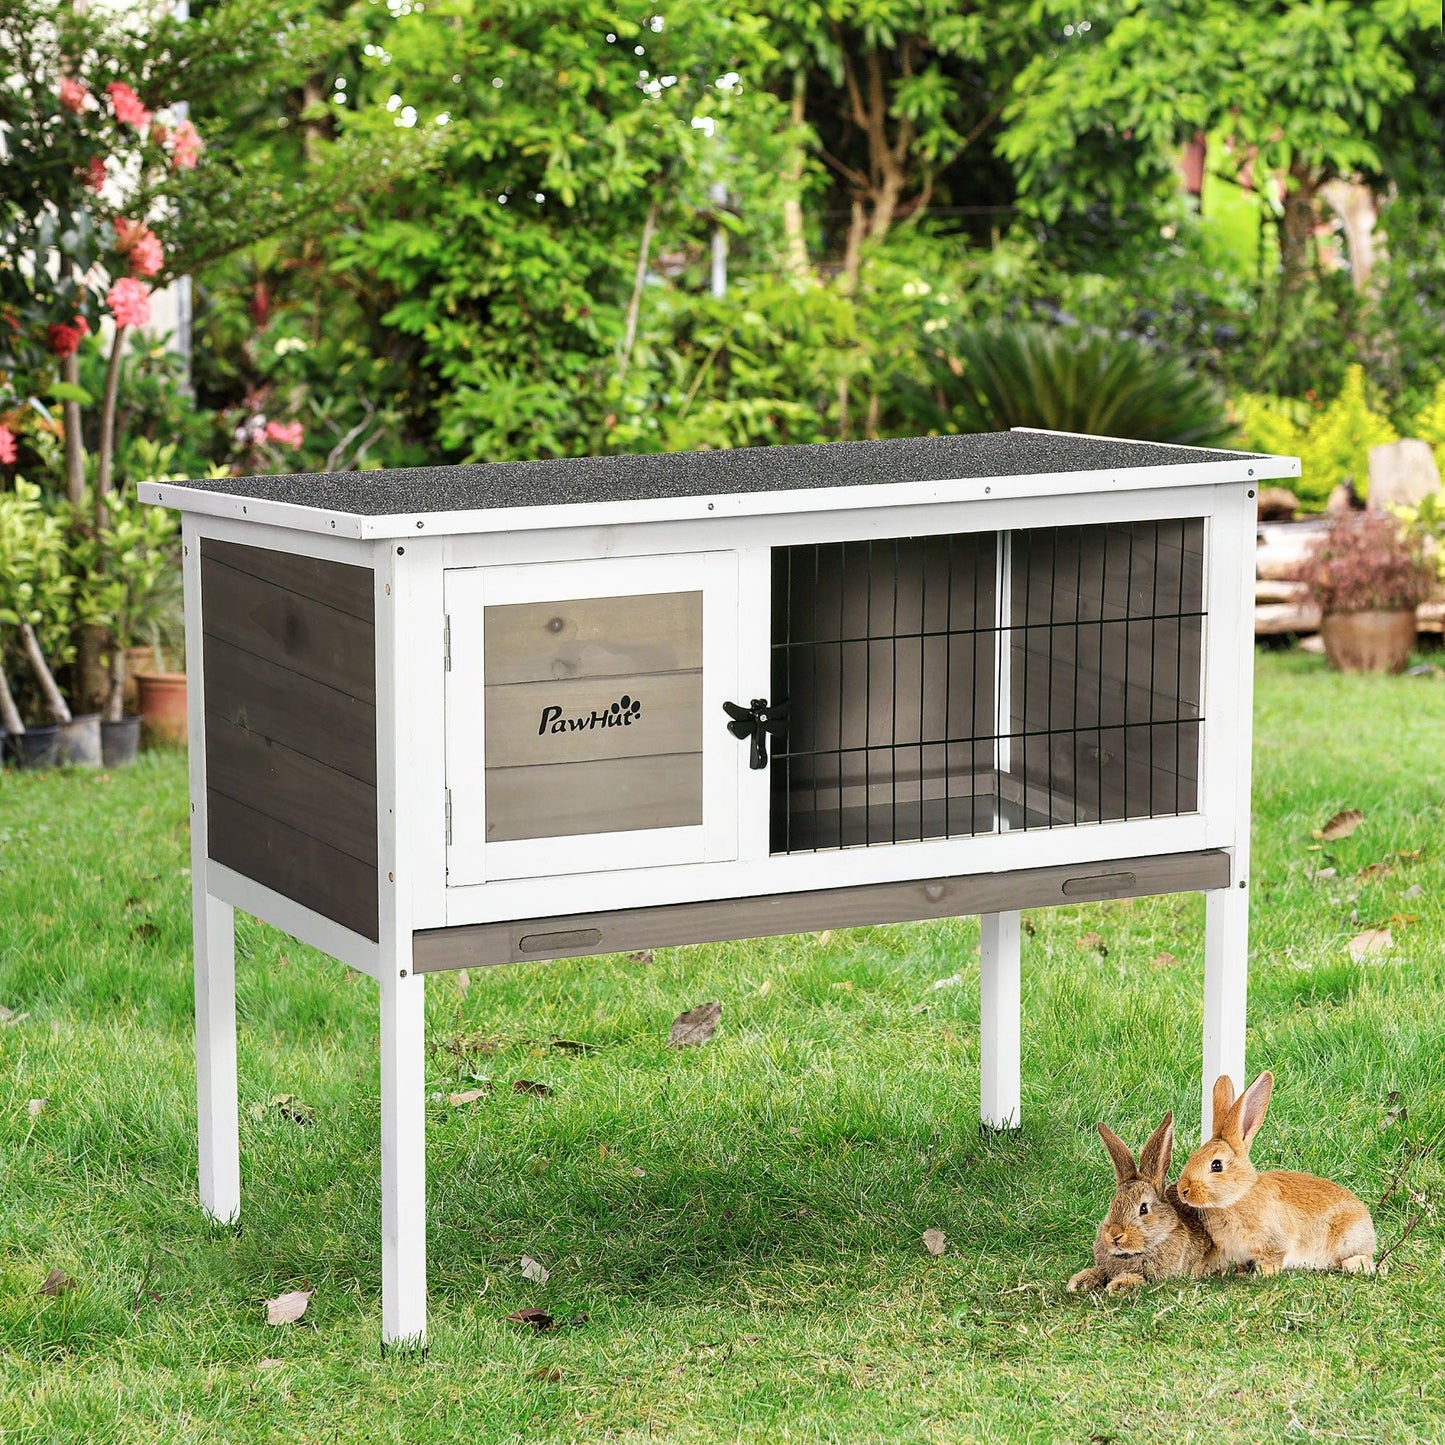 -PawHut Elevated Rabbit Hutch Bunny Hutch with Hinged Asphalt Roof, Removable Tray, Fir Wood Bunny Cage for Indoor/Outdoor, Brown - Outdoor Style Company